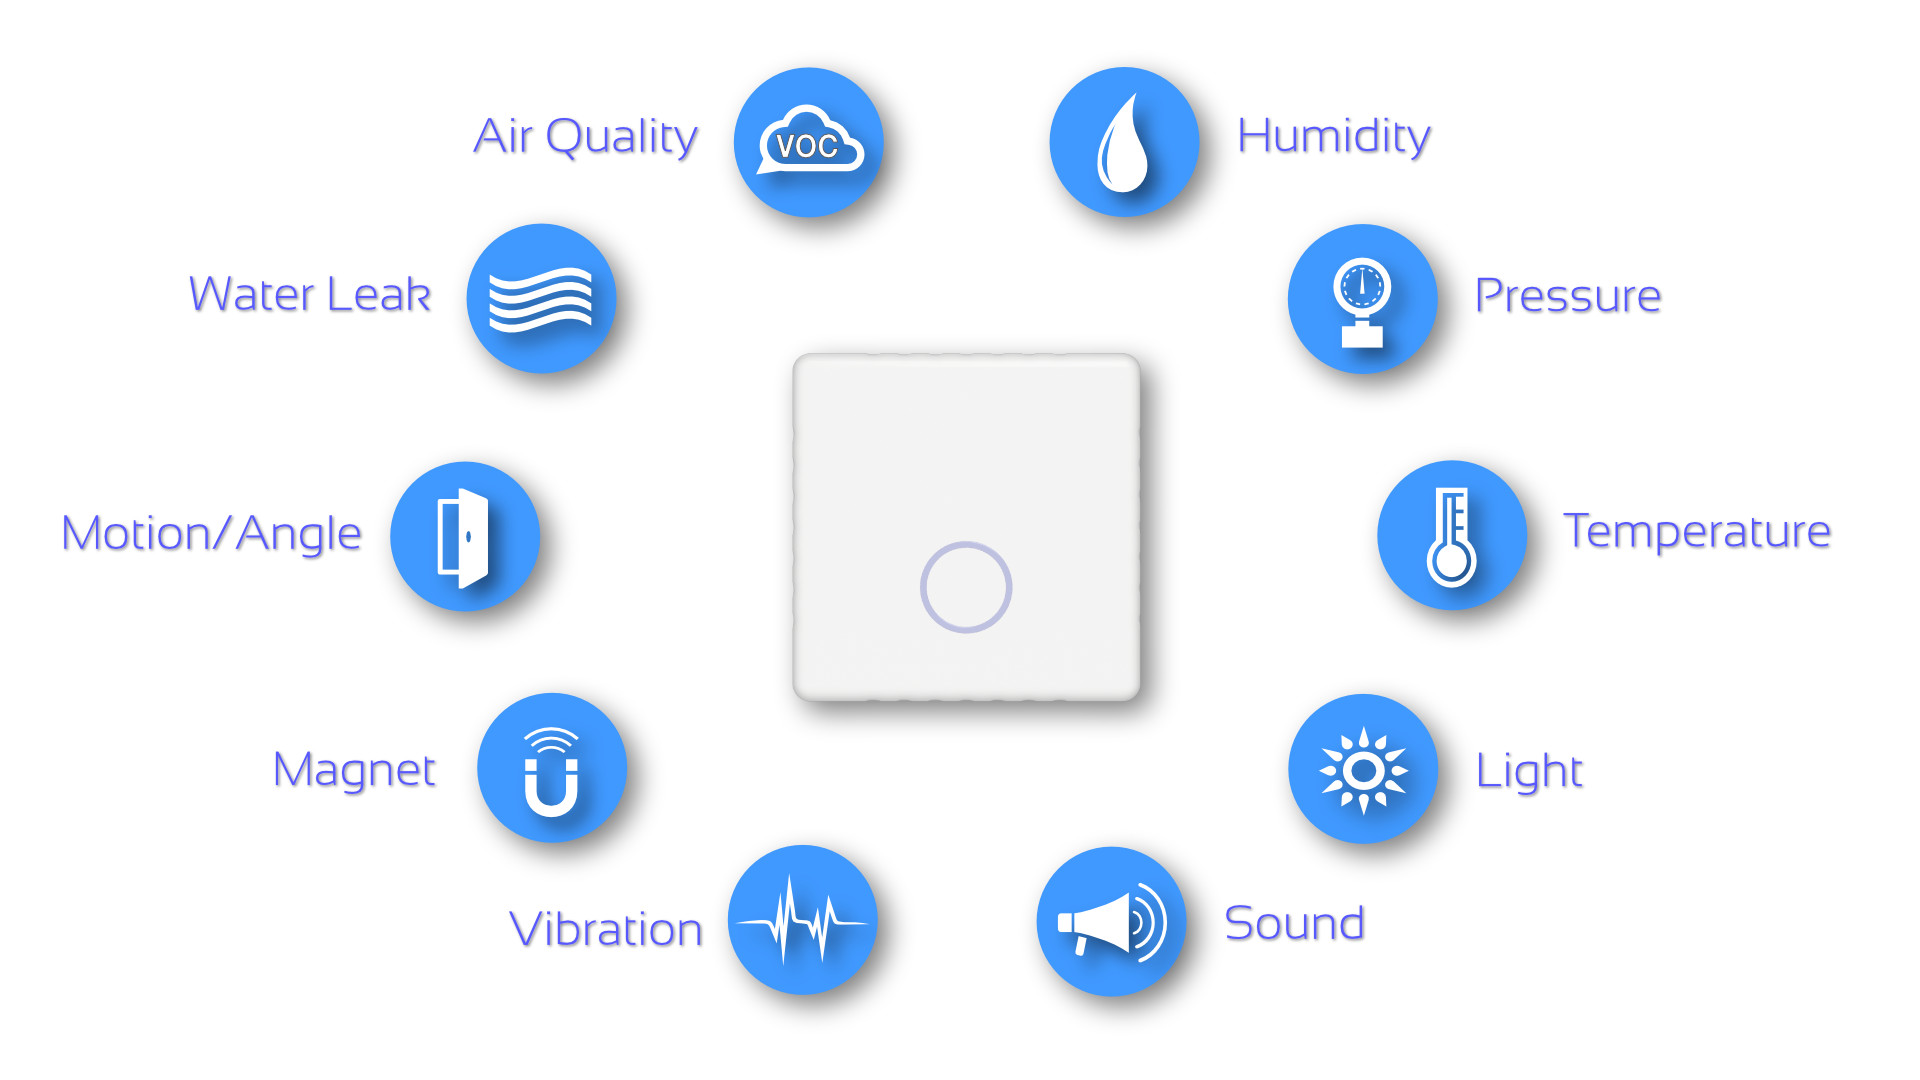 Homsense sensors: Airquality, Humidity, Pressure, Temperature, Light, Sound, Vibration, Magnet, Motion/Angle and Water Leak.